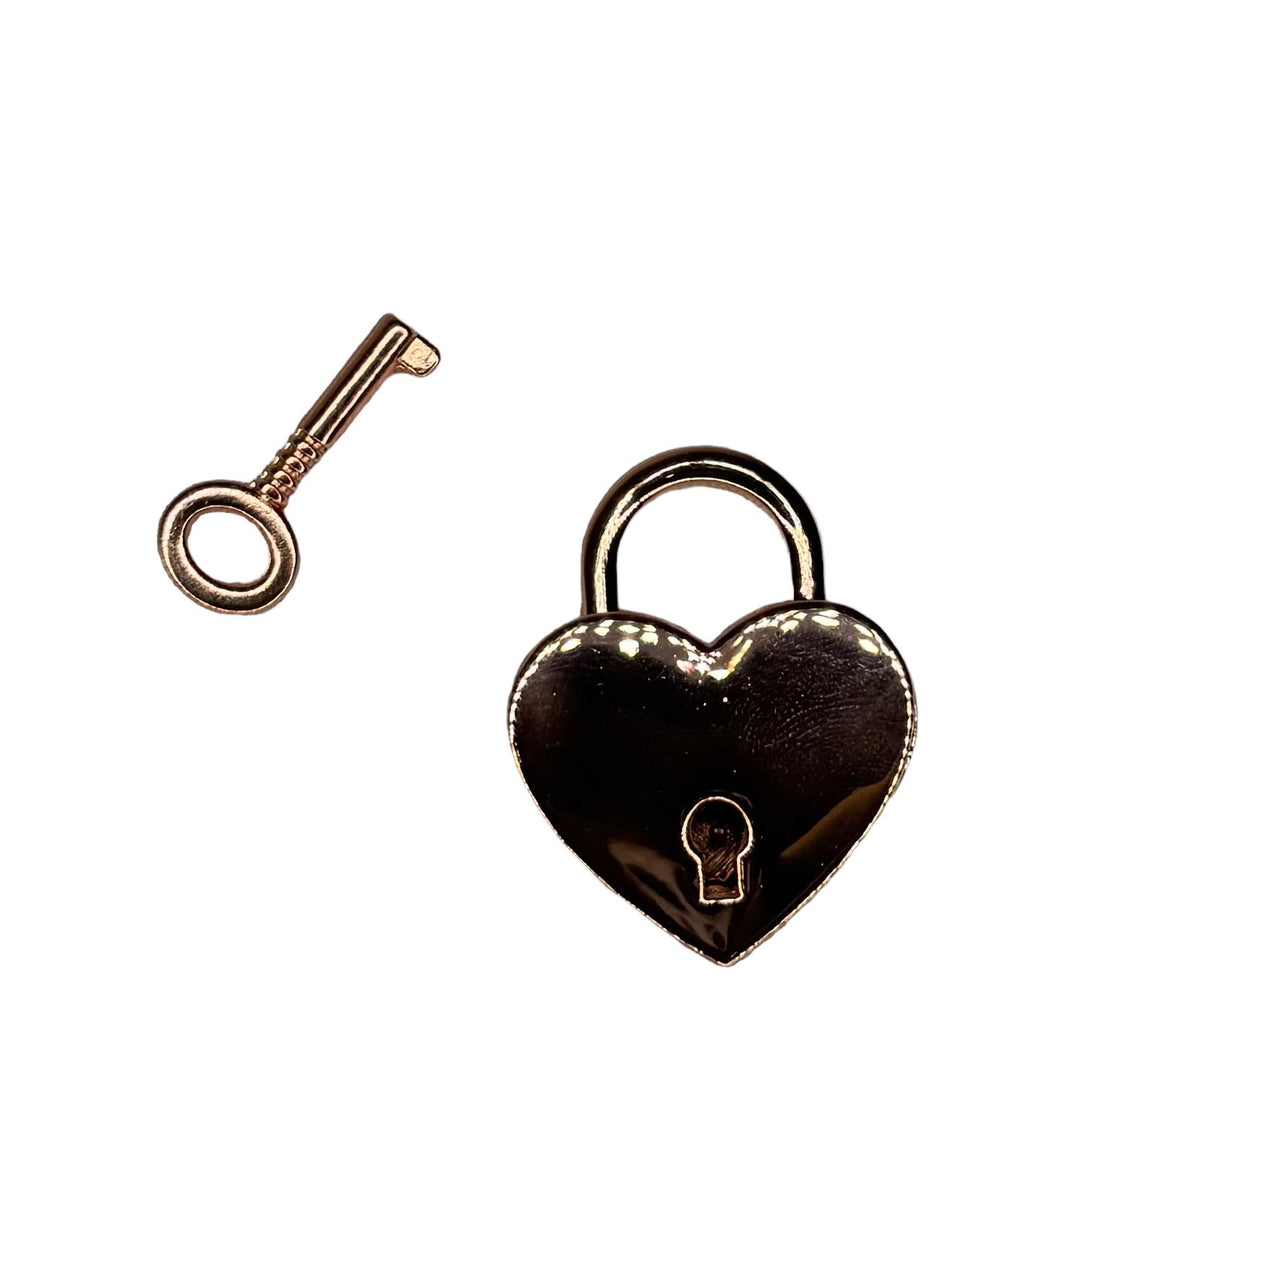 Elegant Heart-Shaped Lock in Rose Gold, Gold, or Silver Symbolic BDSM Accessory